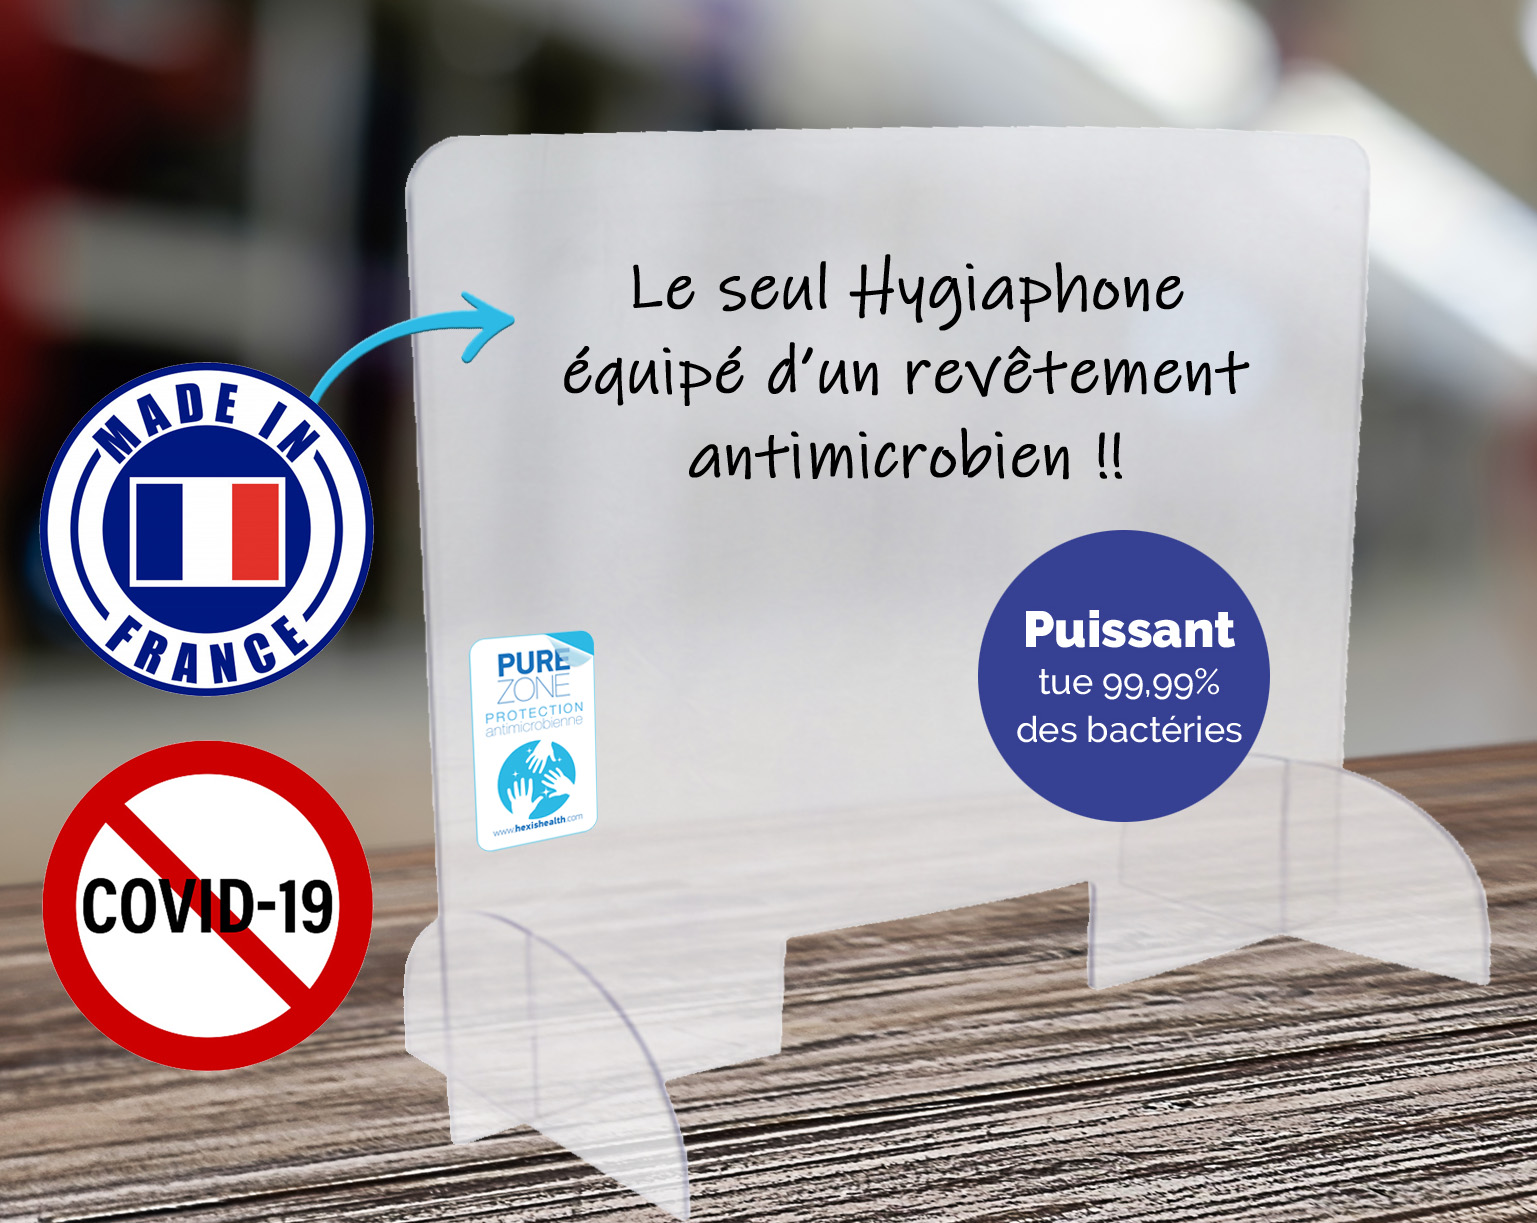 hygiaphone avec protection antimicrobienne anti postillons anti covid-19